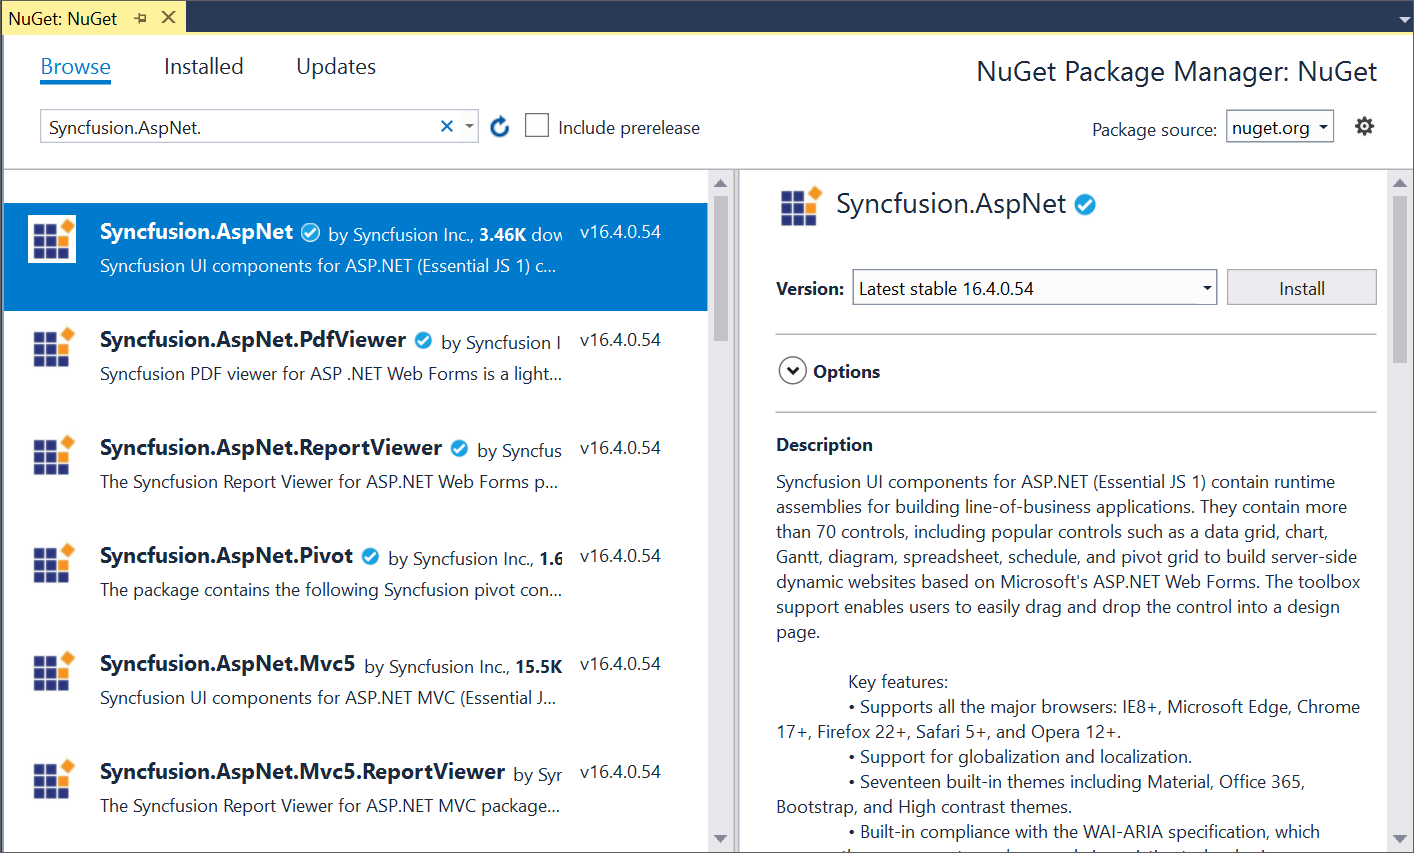 Selecting one of the syncfusion universal nuget package